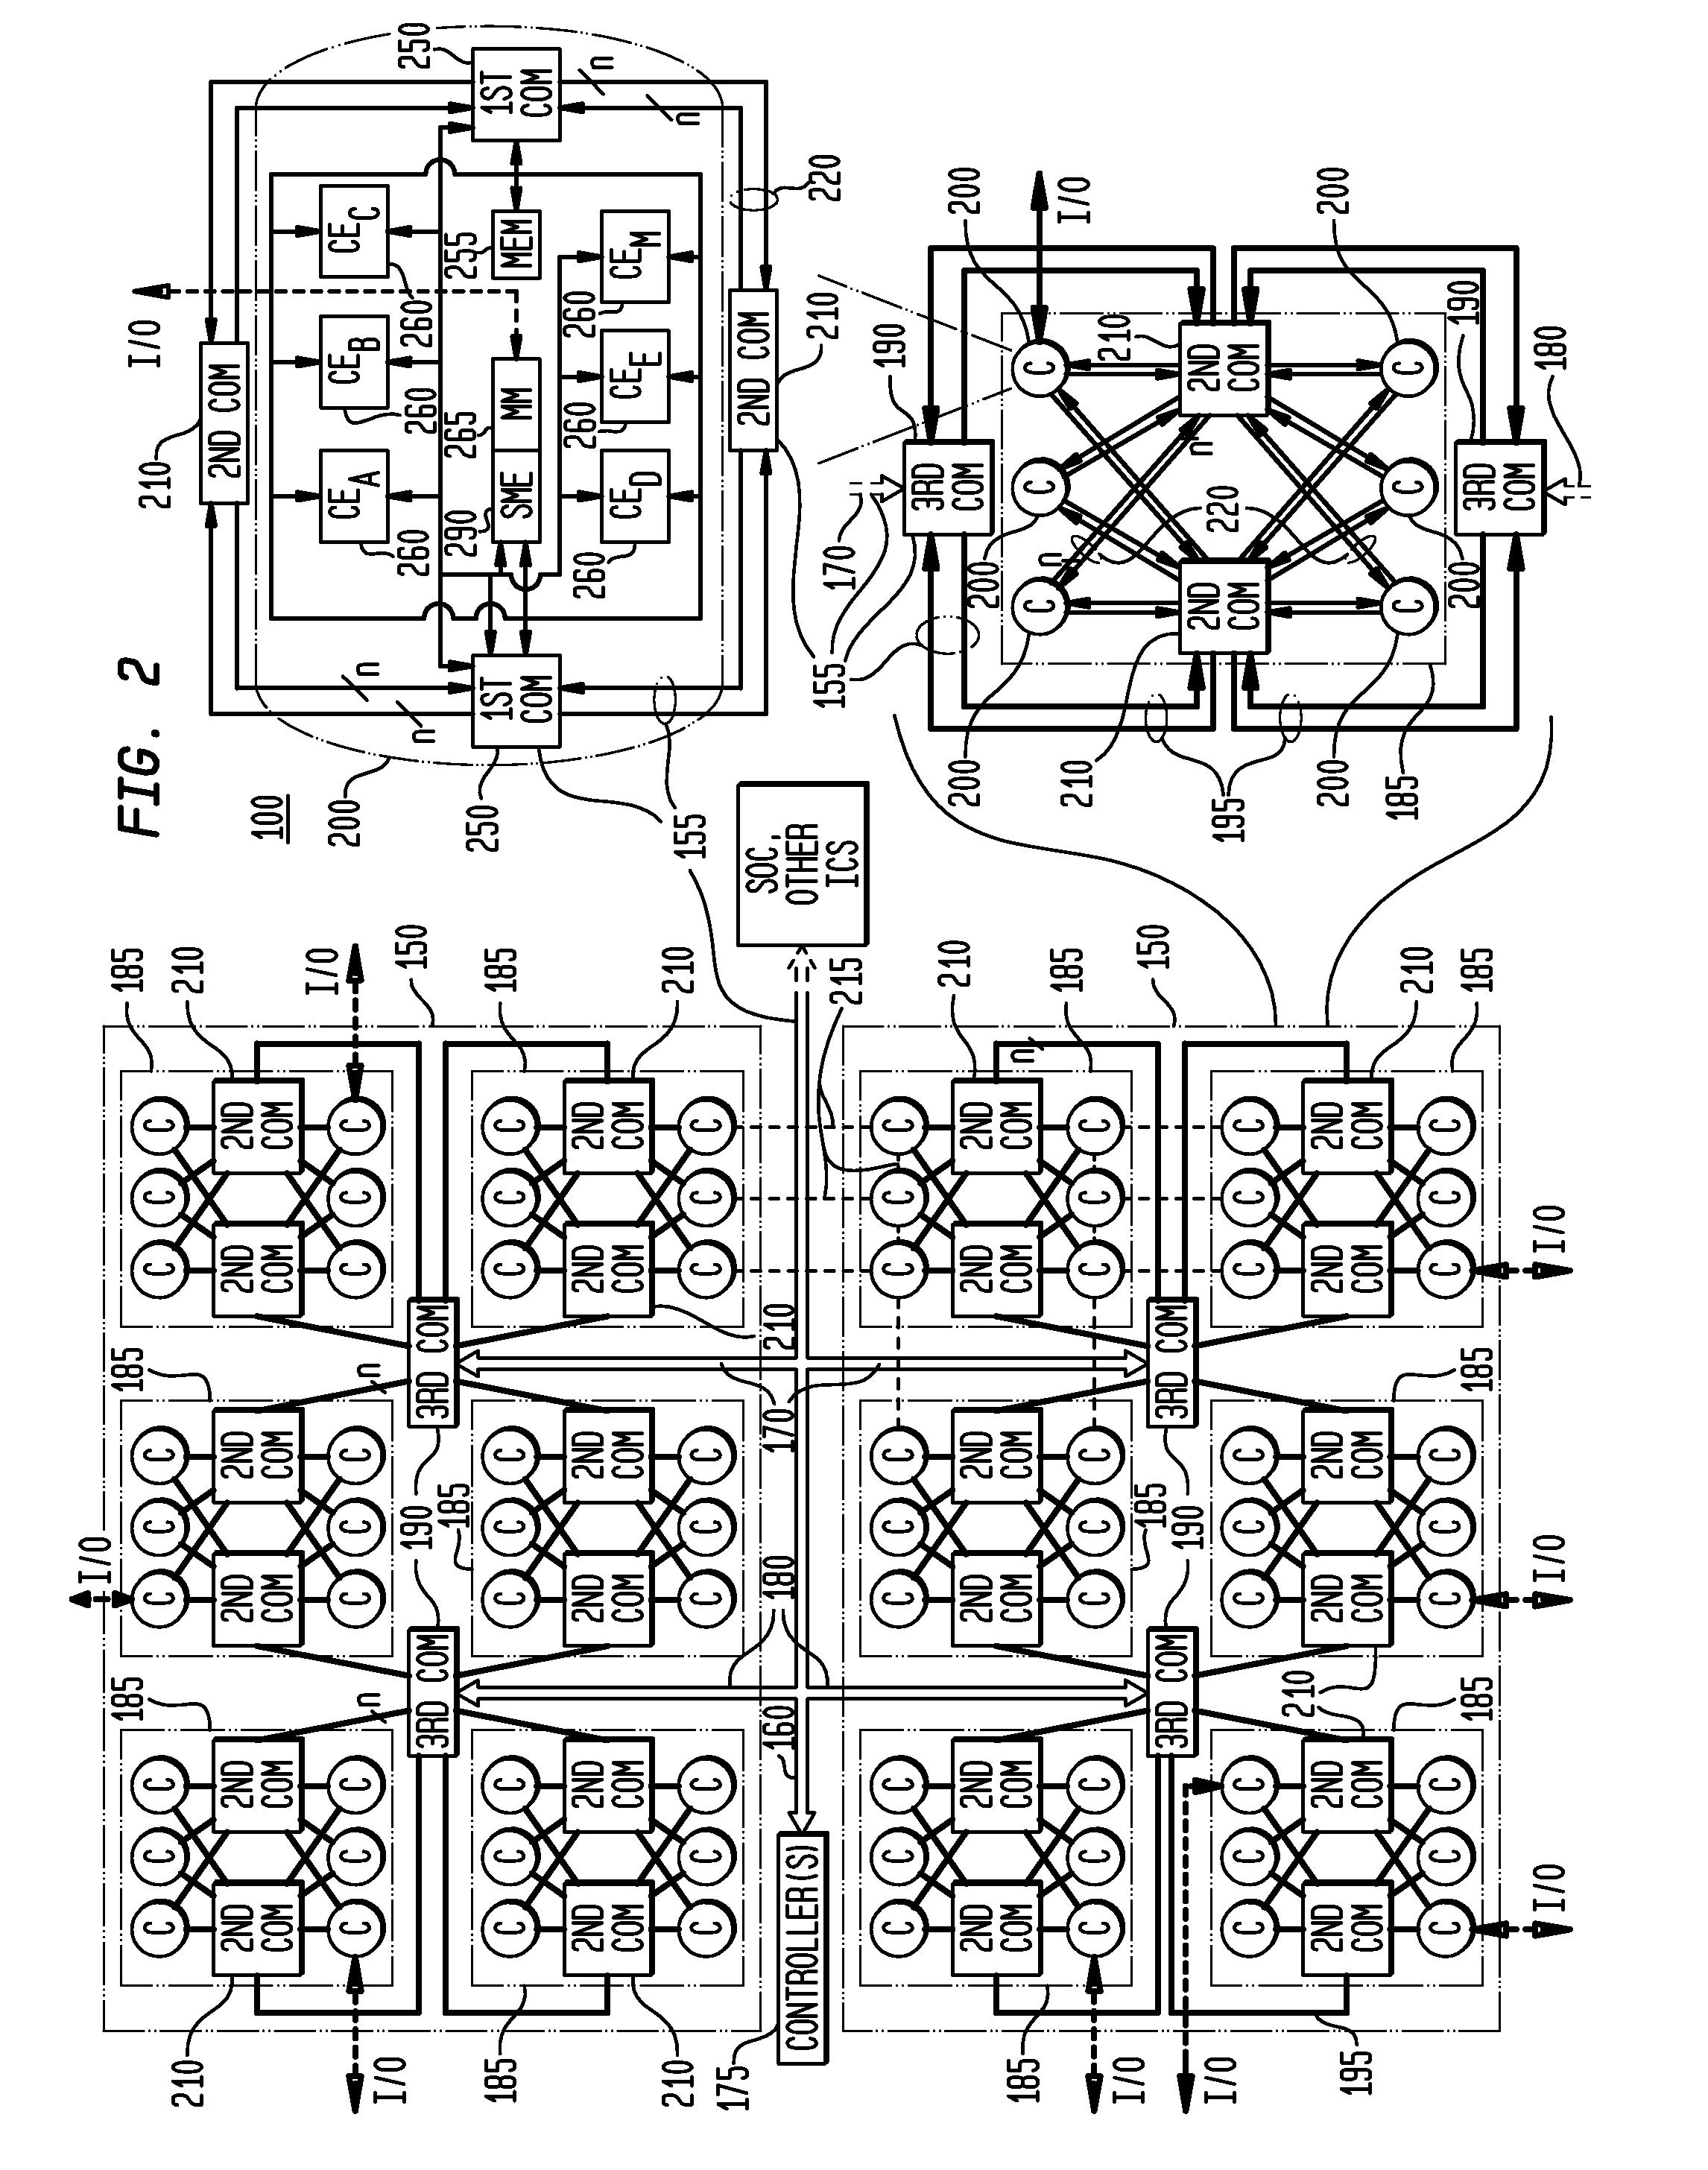 Program Binding System, Method and Software for a Resilient Integrated Circuit Architecture